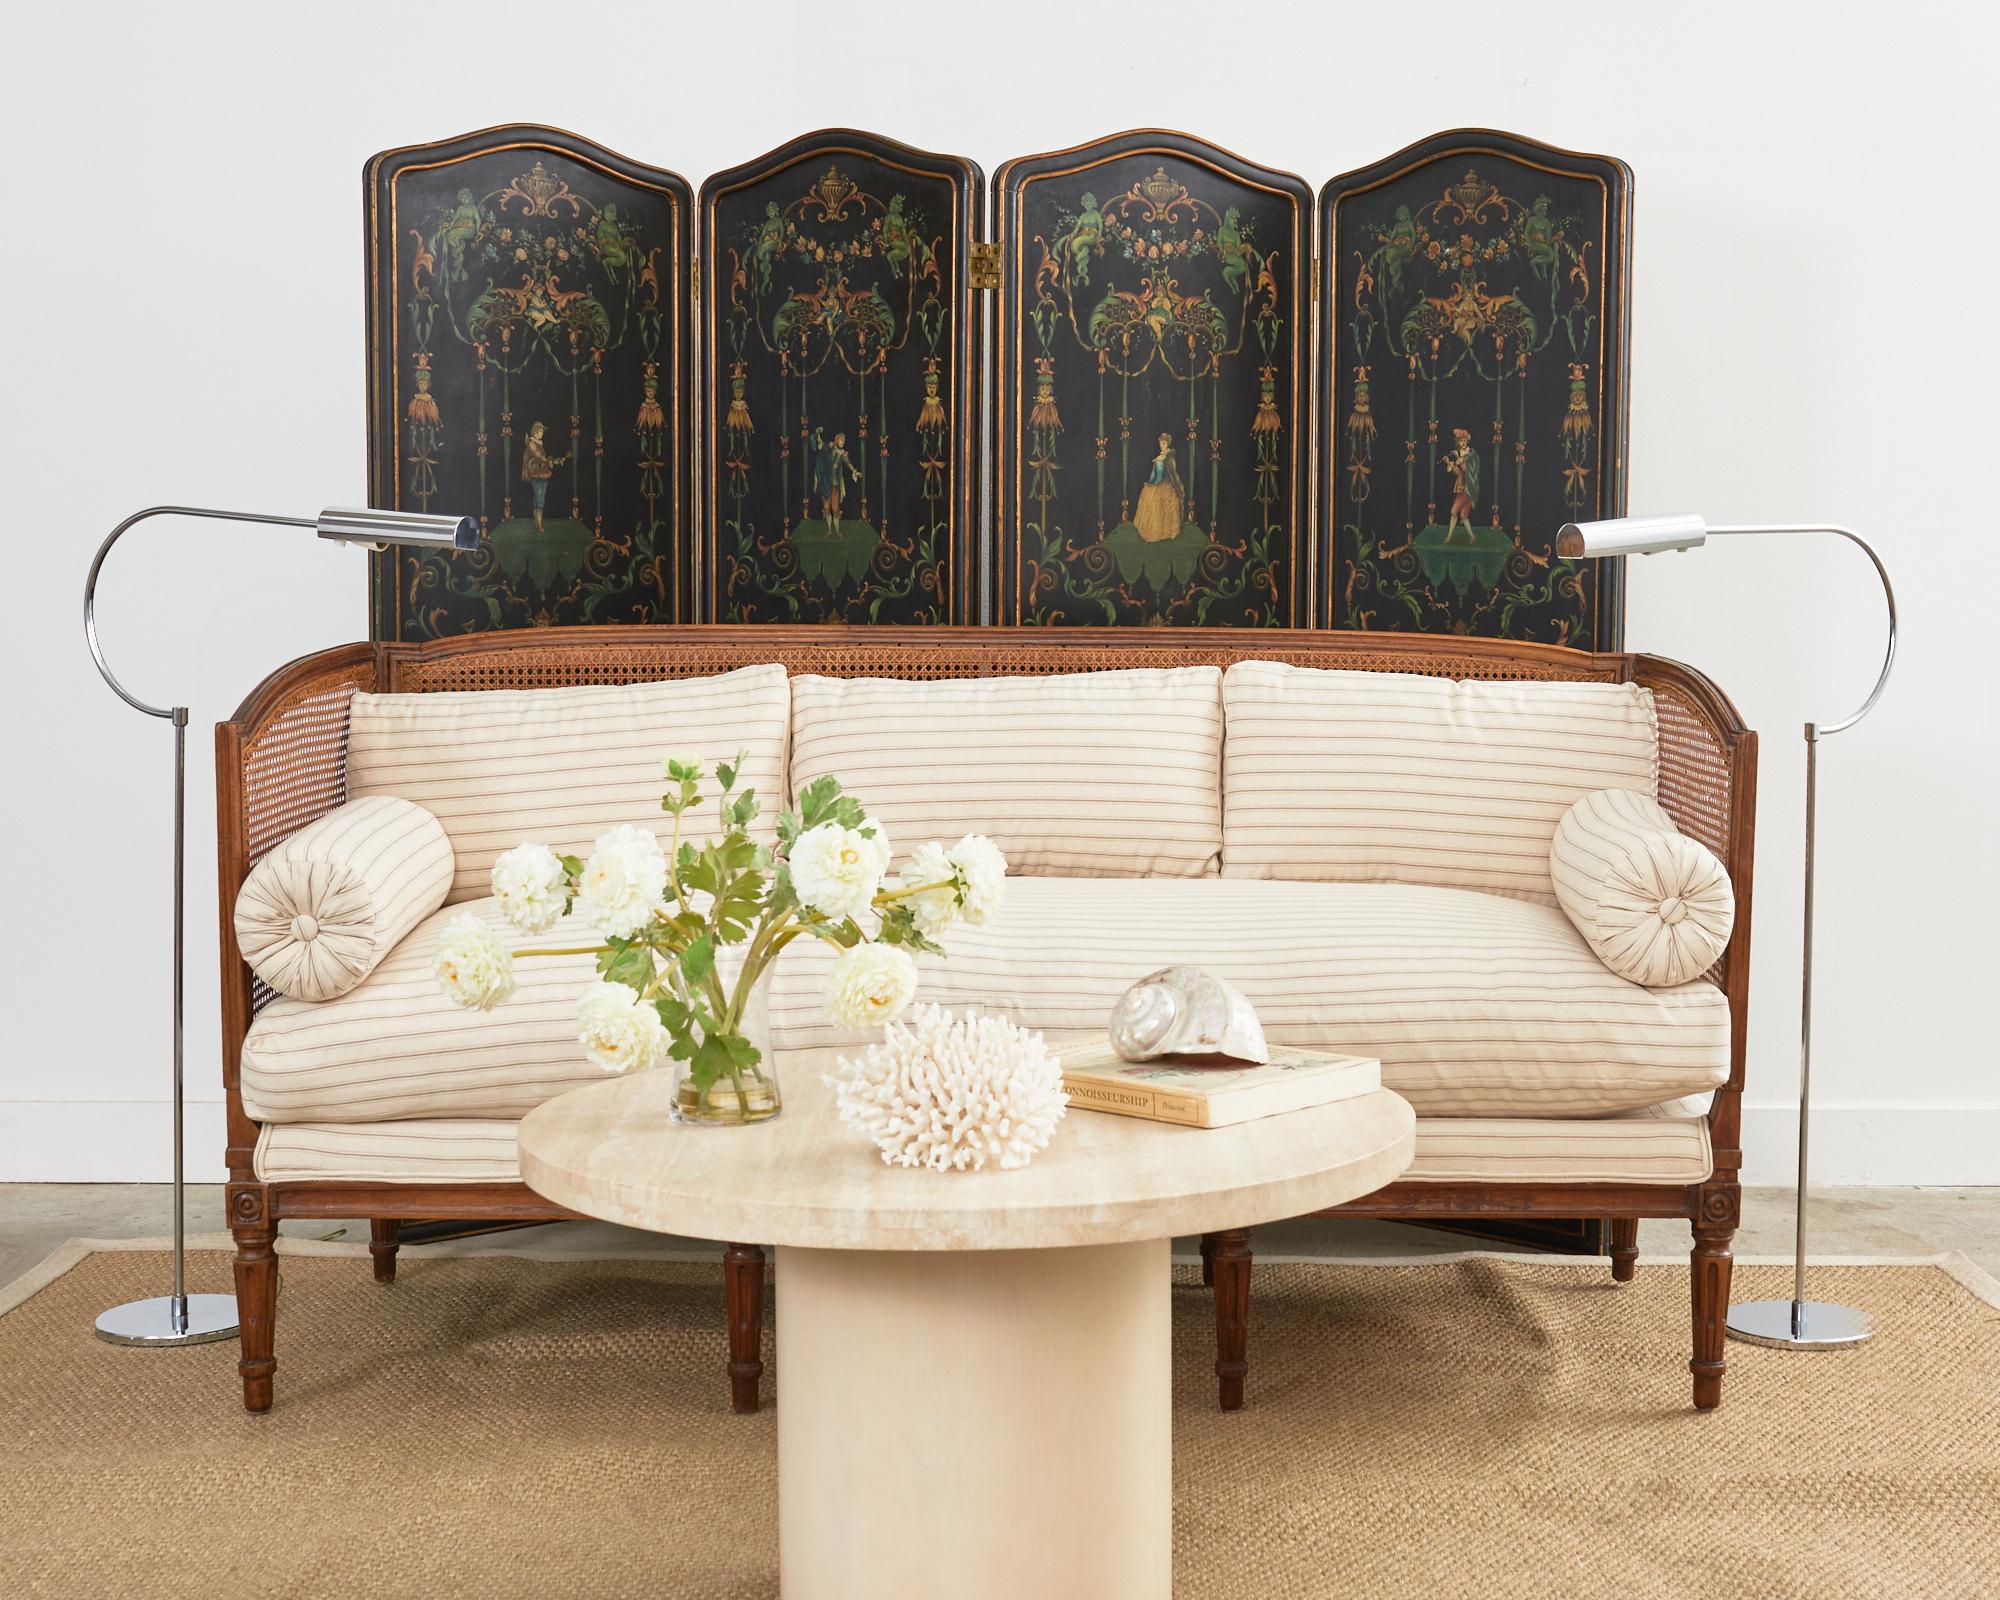 Dramatic hand painted Italian four-panel folding floor screen made in the neoclassical taste. Each panel has two gracefully arched windows with parcel gilt borders over a black ground. The windows are decorated with mythical scenes of figures amid